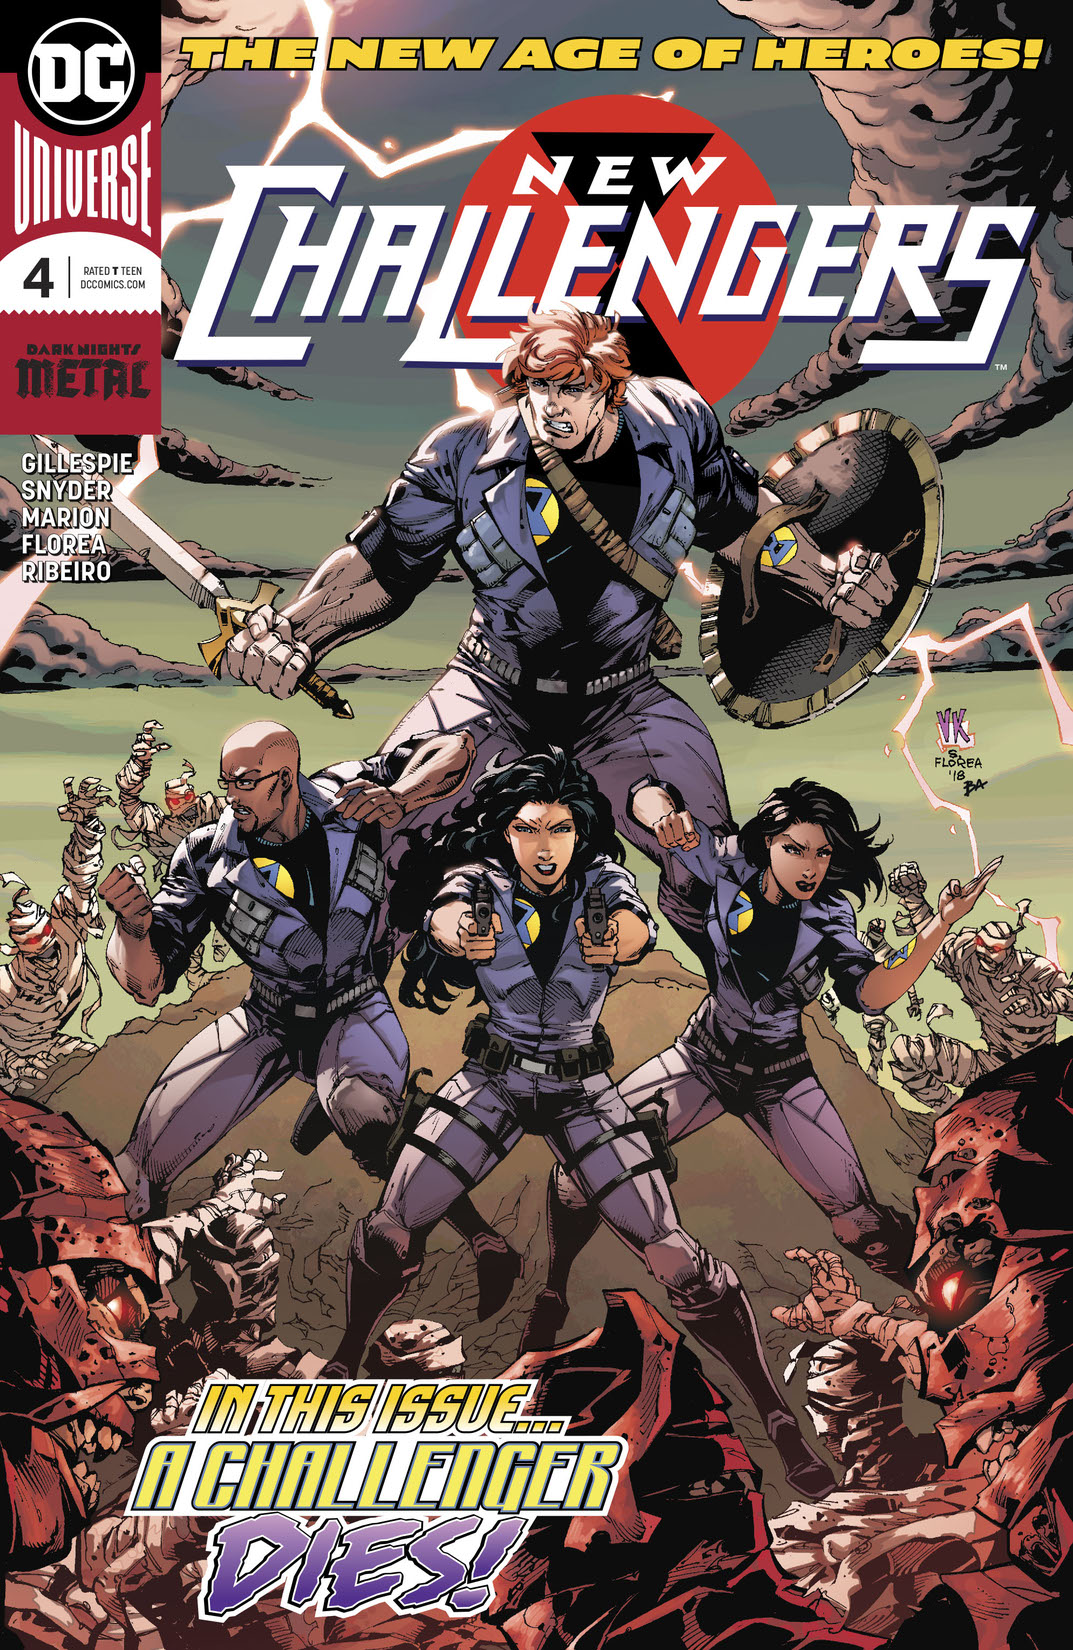 New Challengers #4 preview images